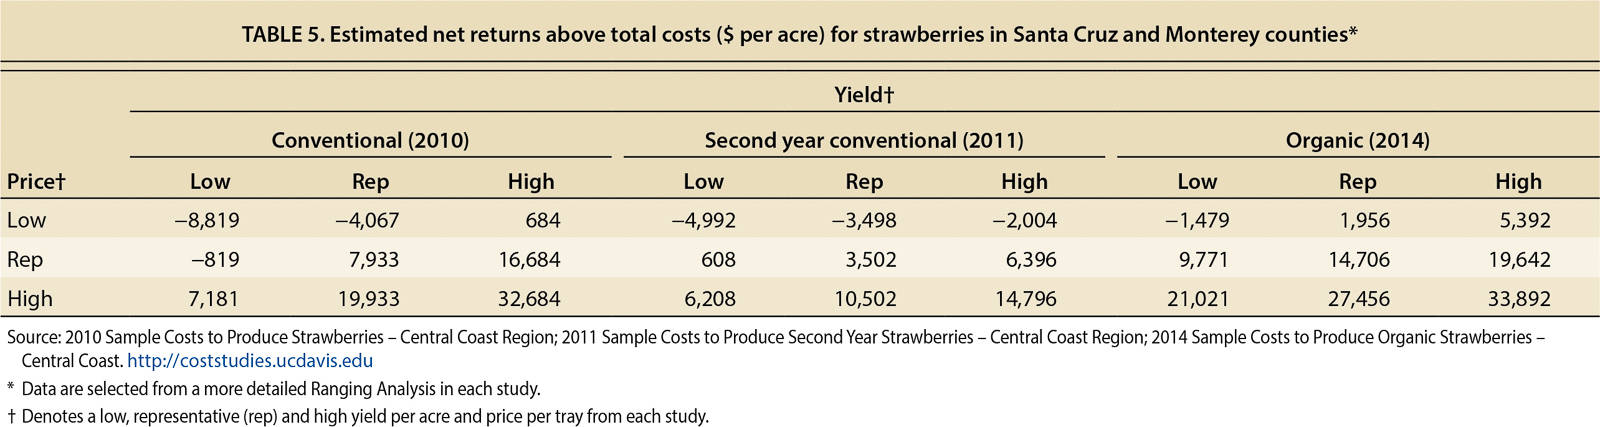 Estimated net returns above total costs ($ per acre) for strawberries in Santa Cruz and Monterey counties*